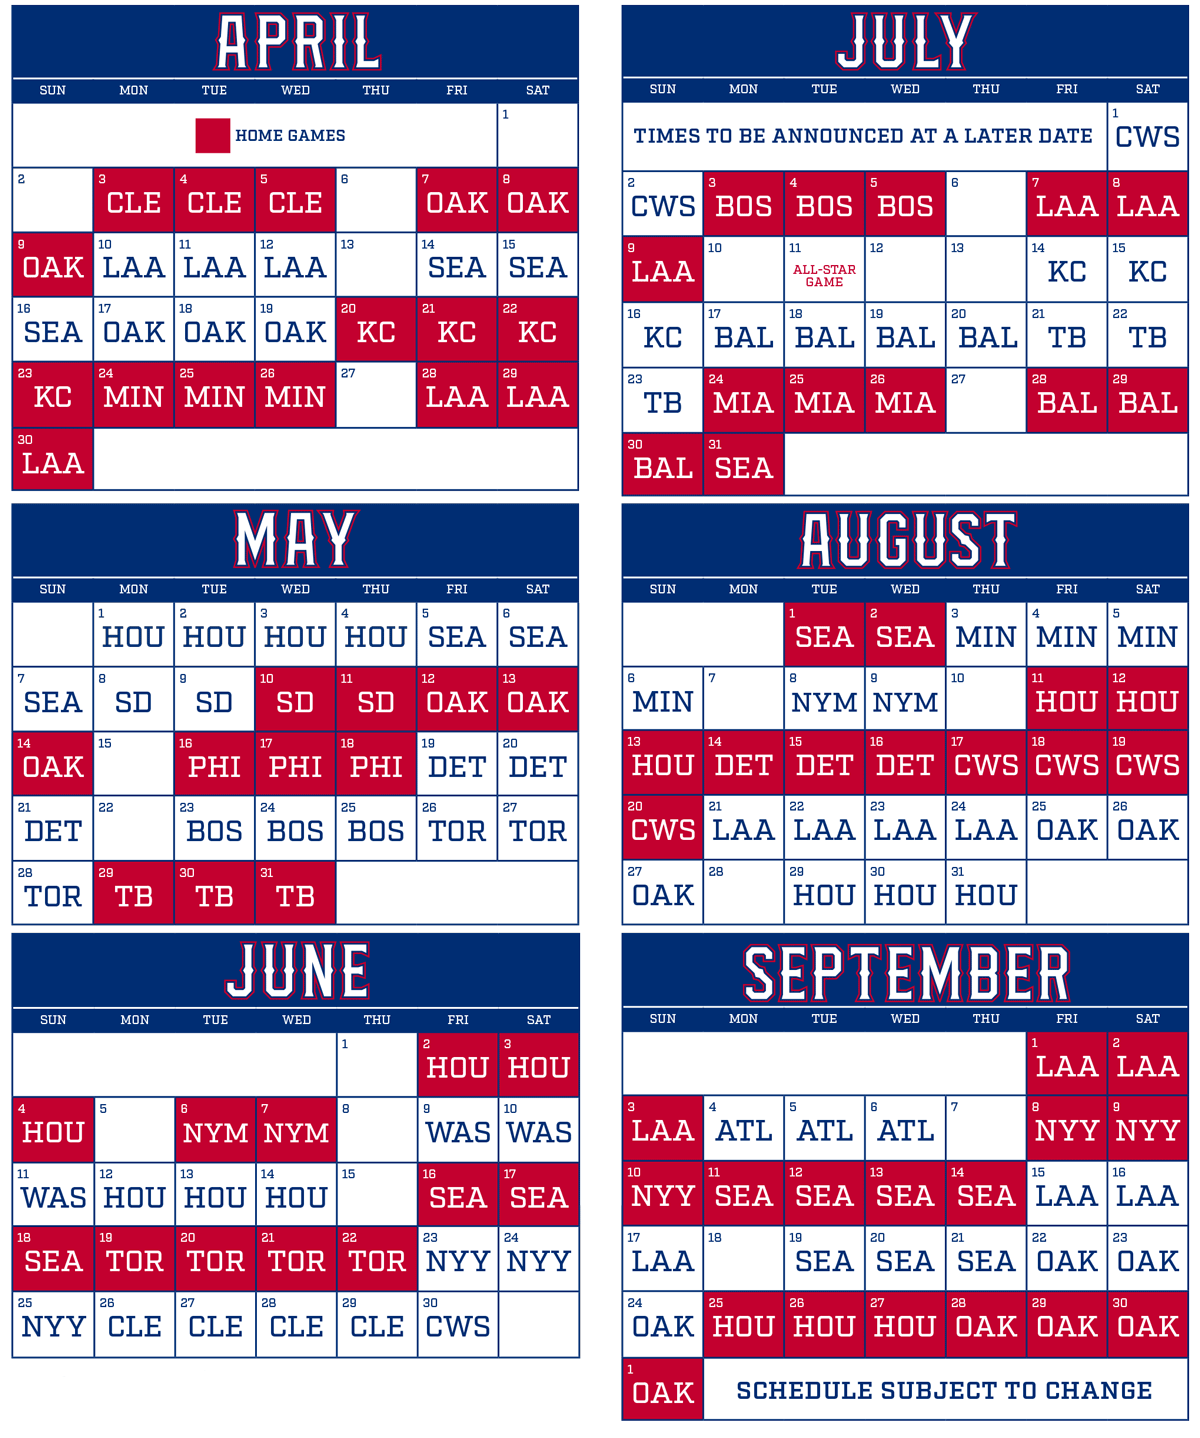 Rangers 2017 schedule released: Texas to open next season at home, play NL East in interleague